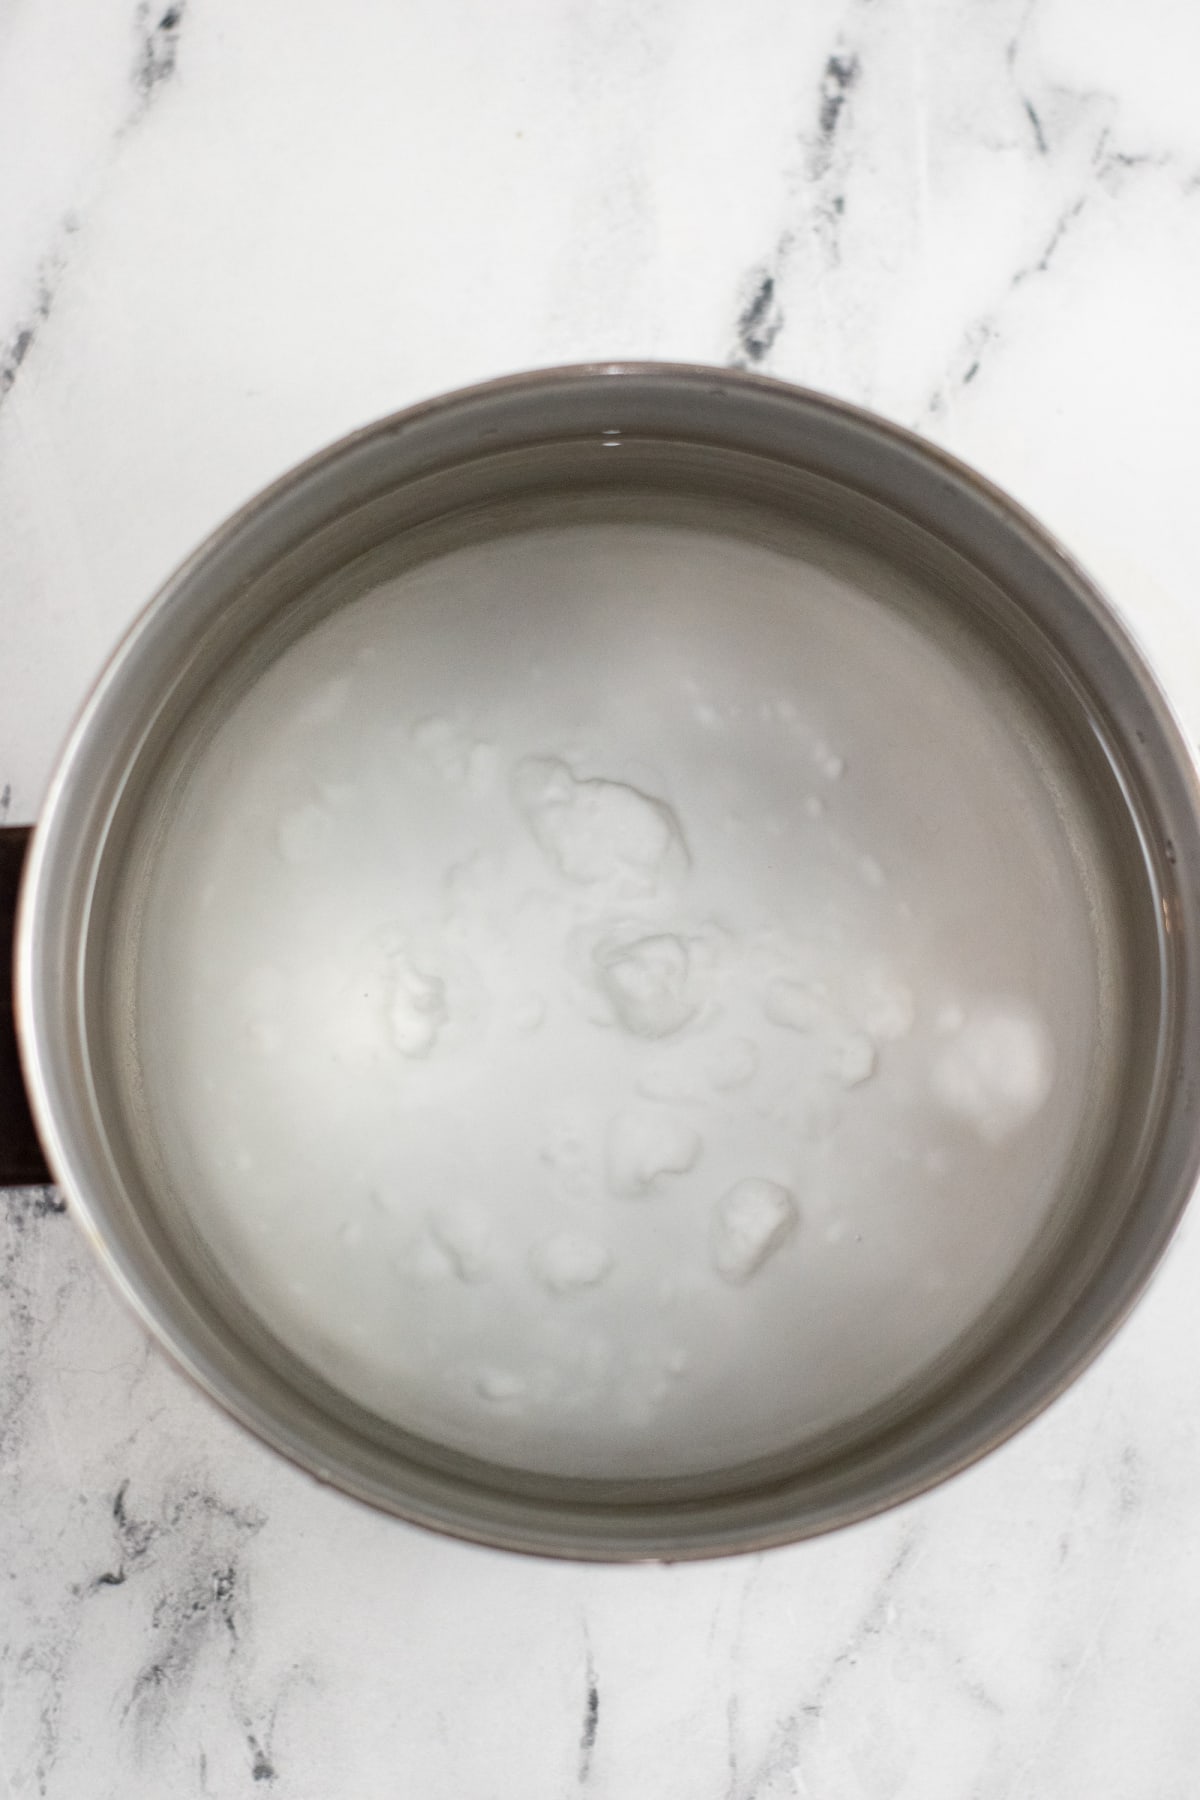 Baking soda and water in large pot